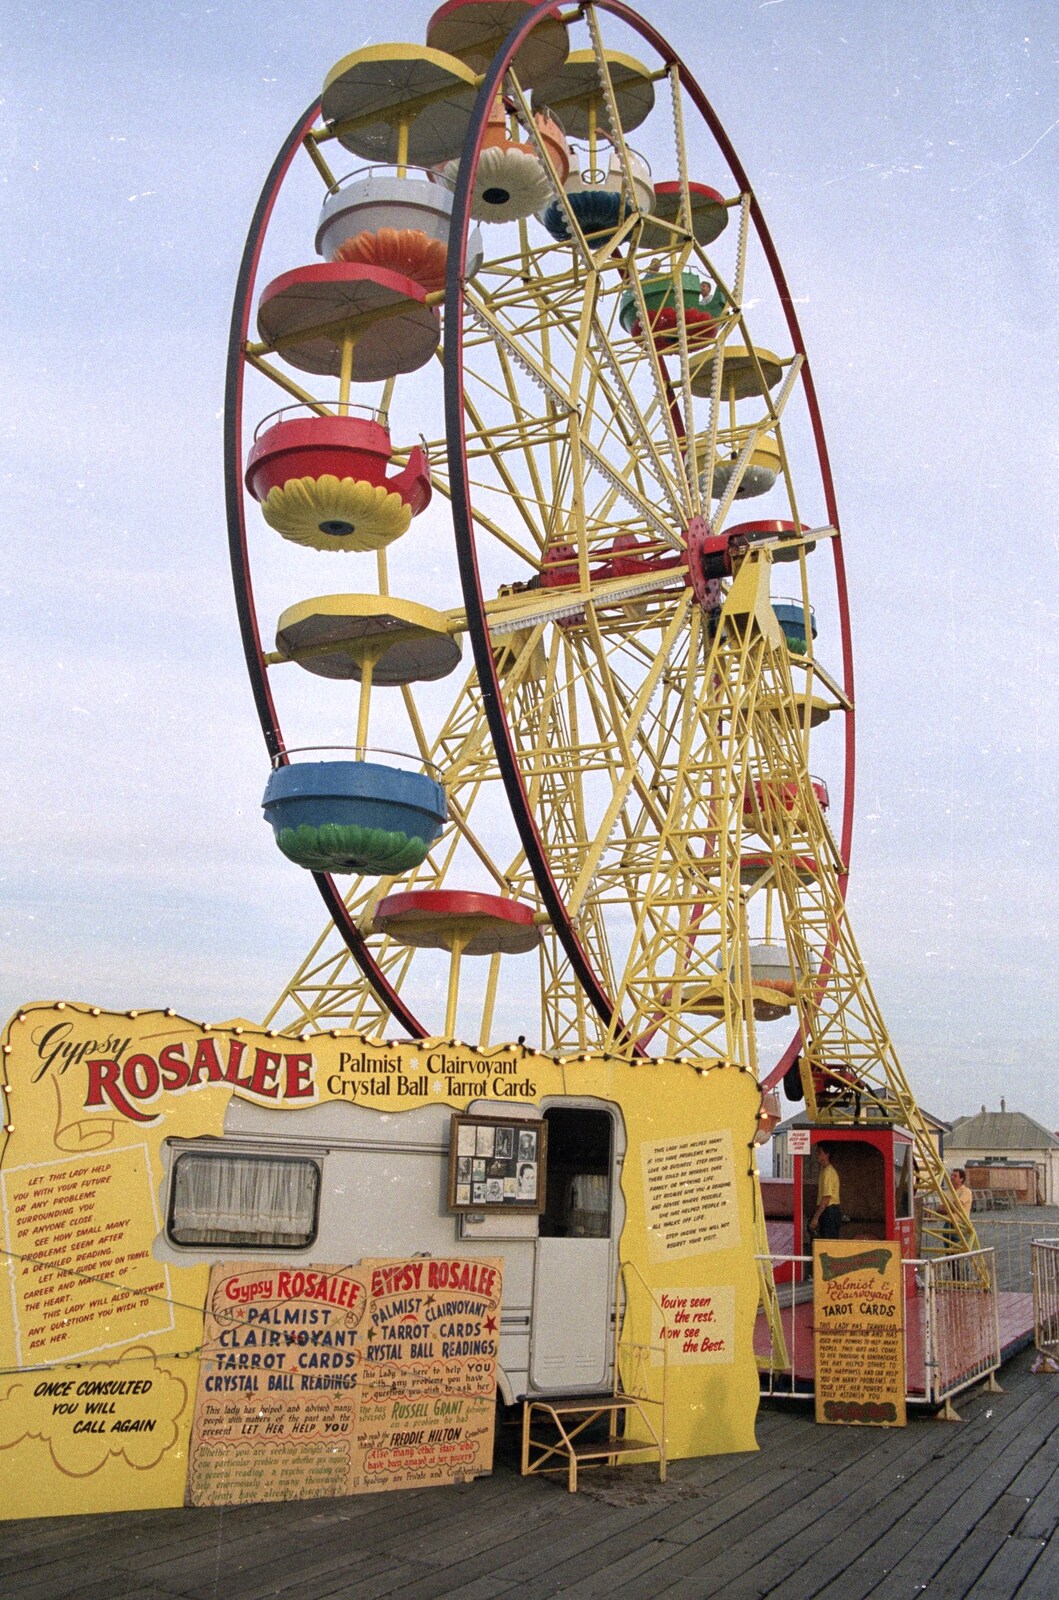 Printec Karl's Birthday, and Clacton Pier With Steve-O, Weybread and Essex - 22nd August 1990: A Gypsy caravan and a ferris wheel, on Clacton Pier